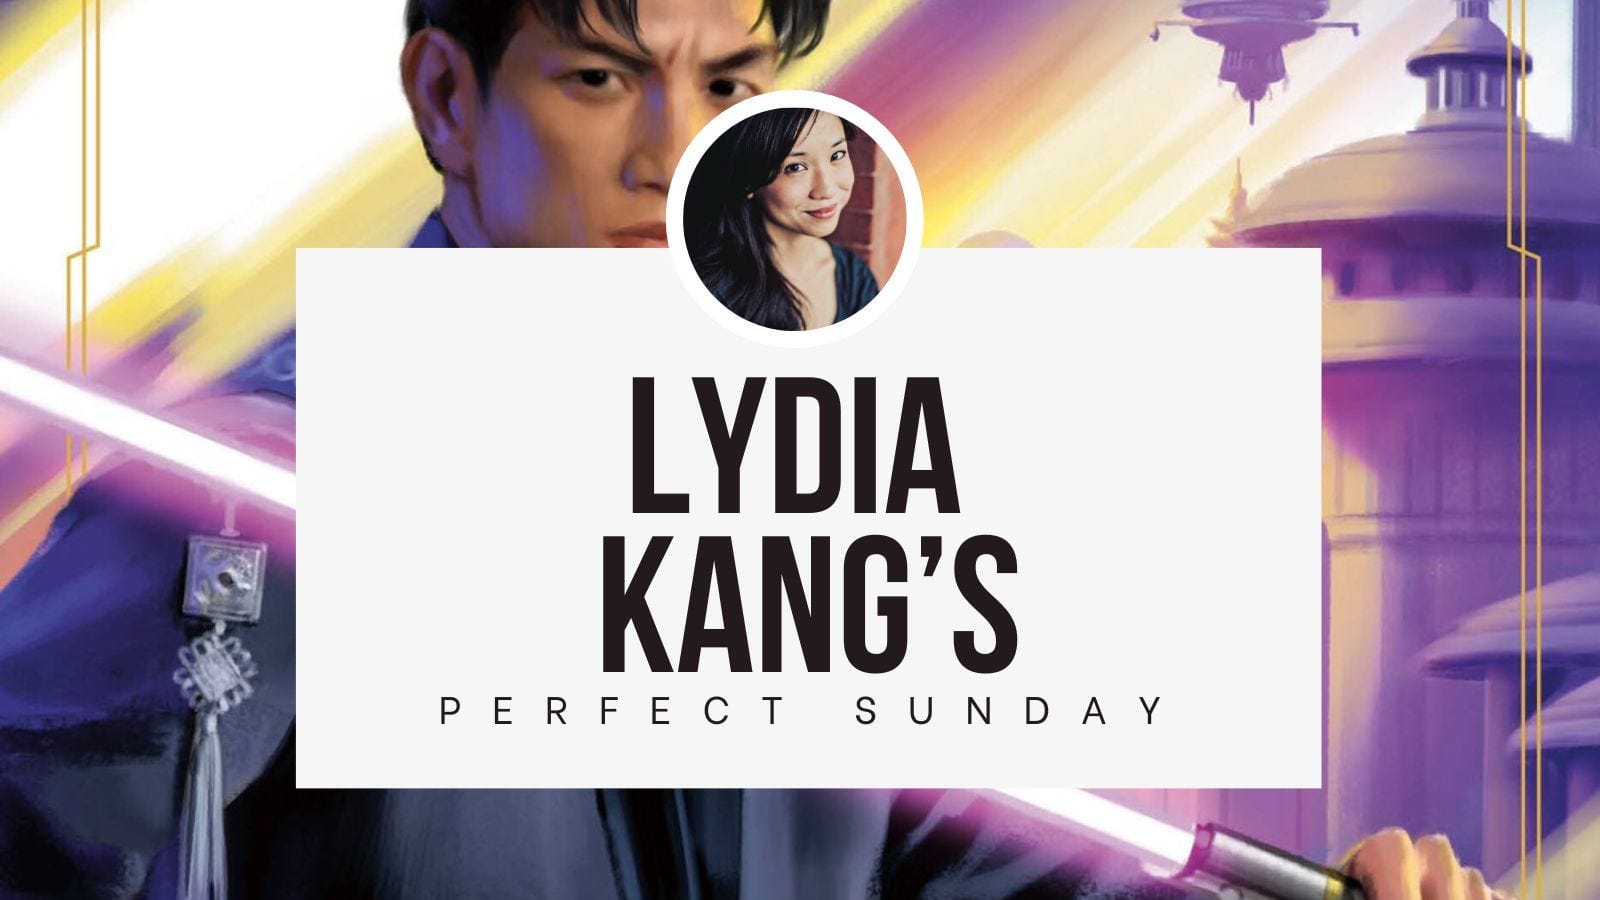 A perfect Sunday with... Lydia Kang